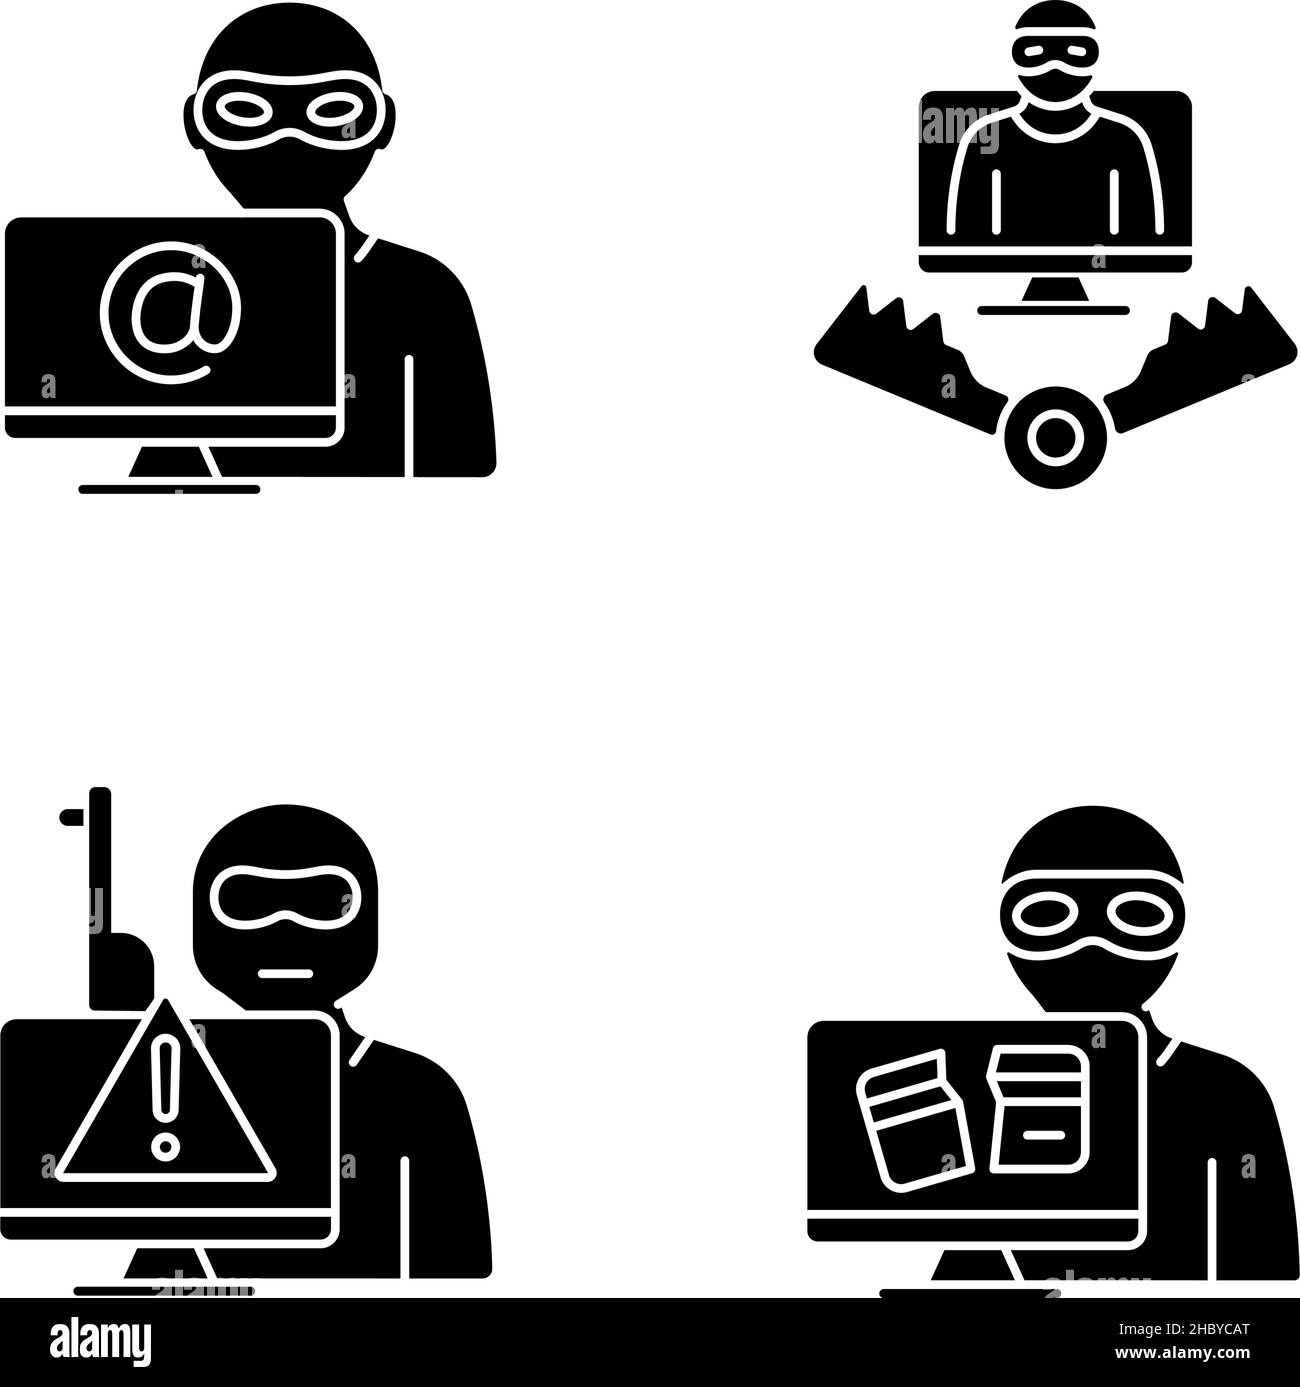 Cyber attacker black glyph icons set on white space Stock Vector